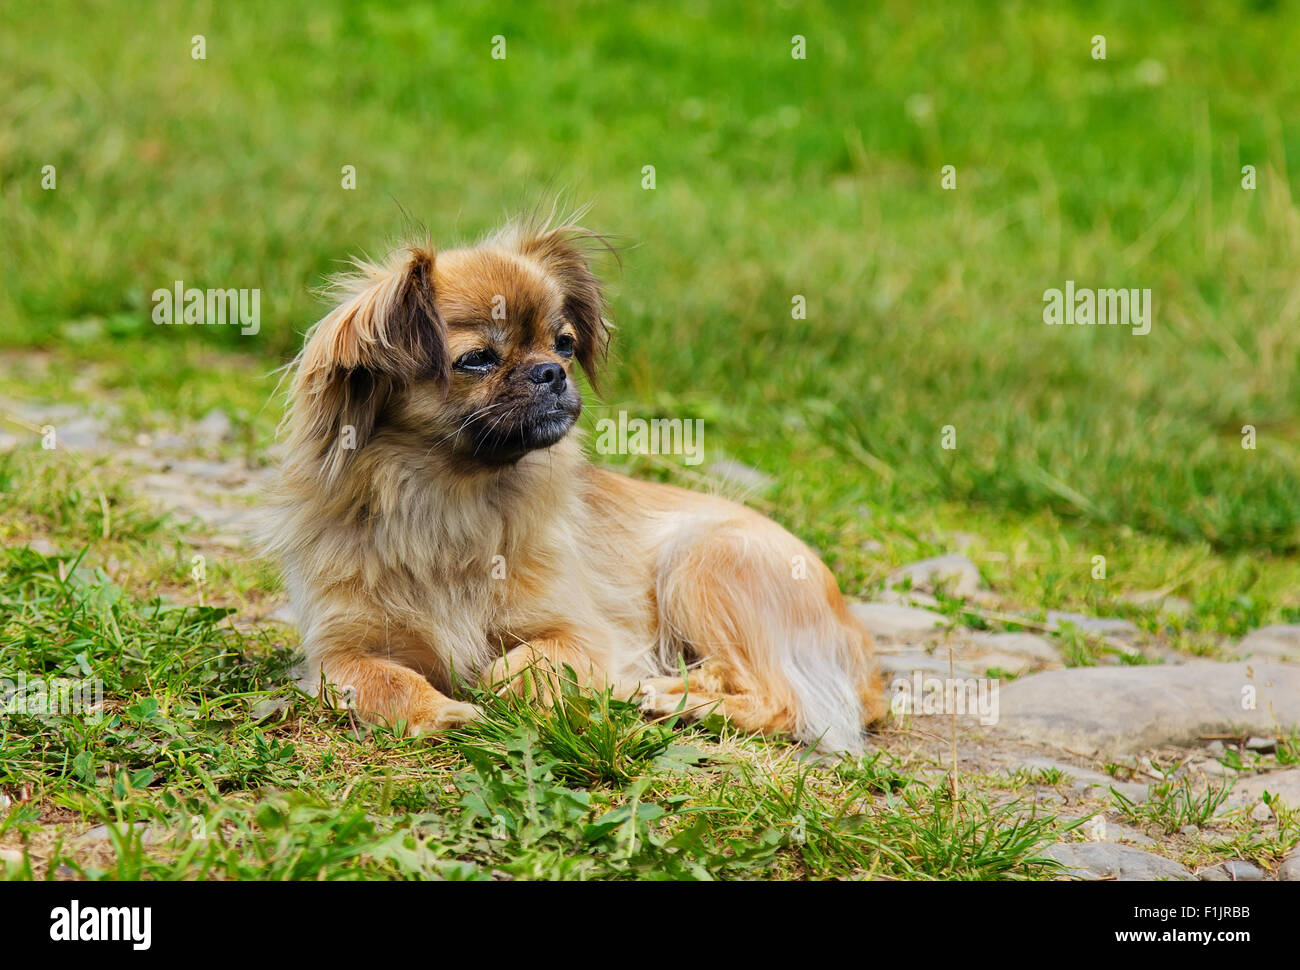 Portrait of Pekingese dog on a grass outdoor Stock Photo